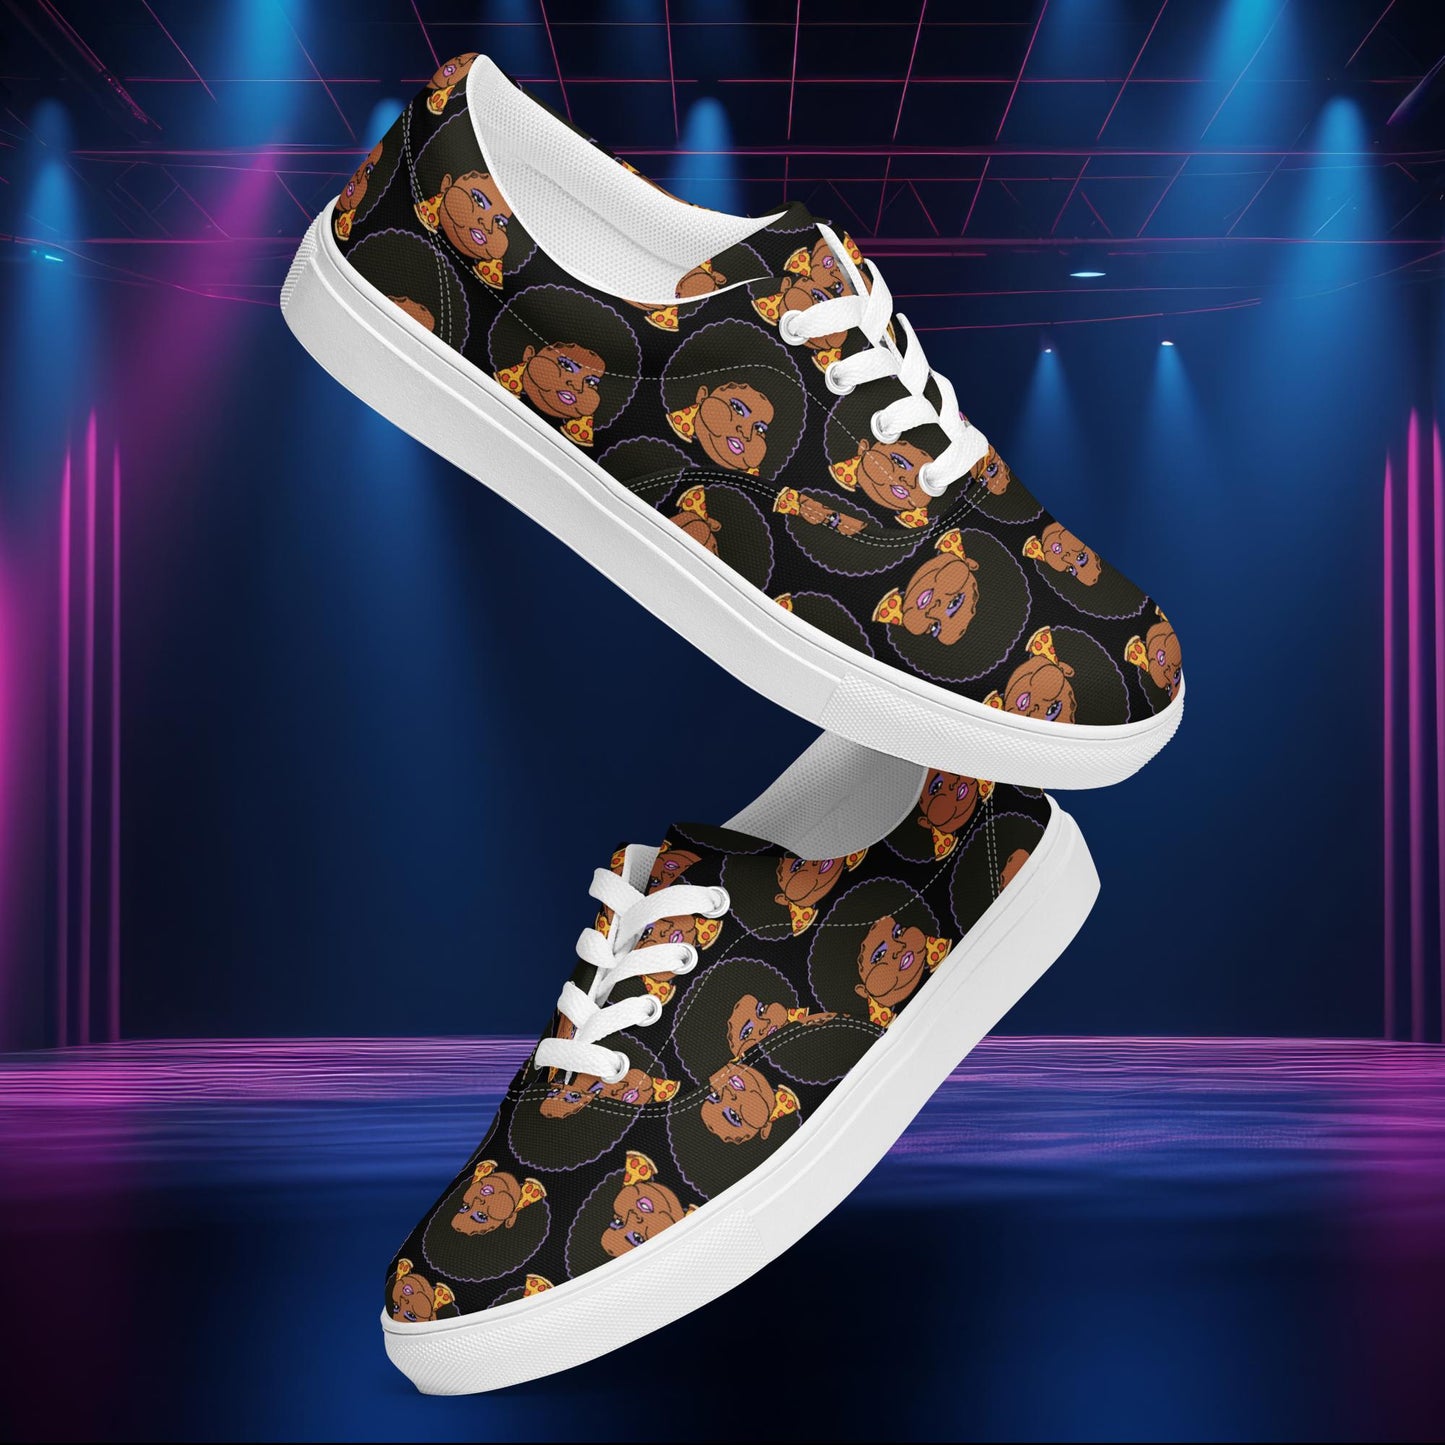 Pizzo Lizzo Pizza Lizzo Merch Lizzo Gift Song Lyrics Lizzo lace-up canvas shoes Next Cult Brand